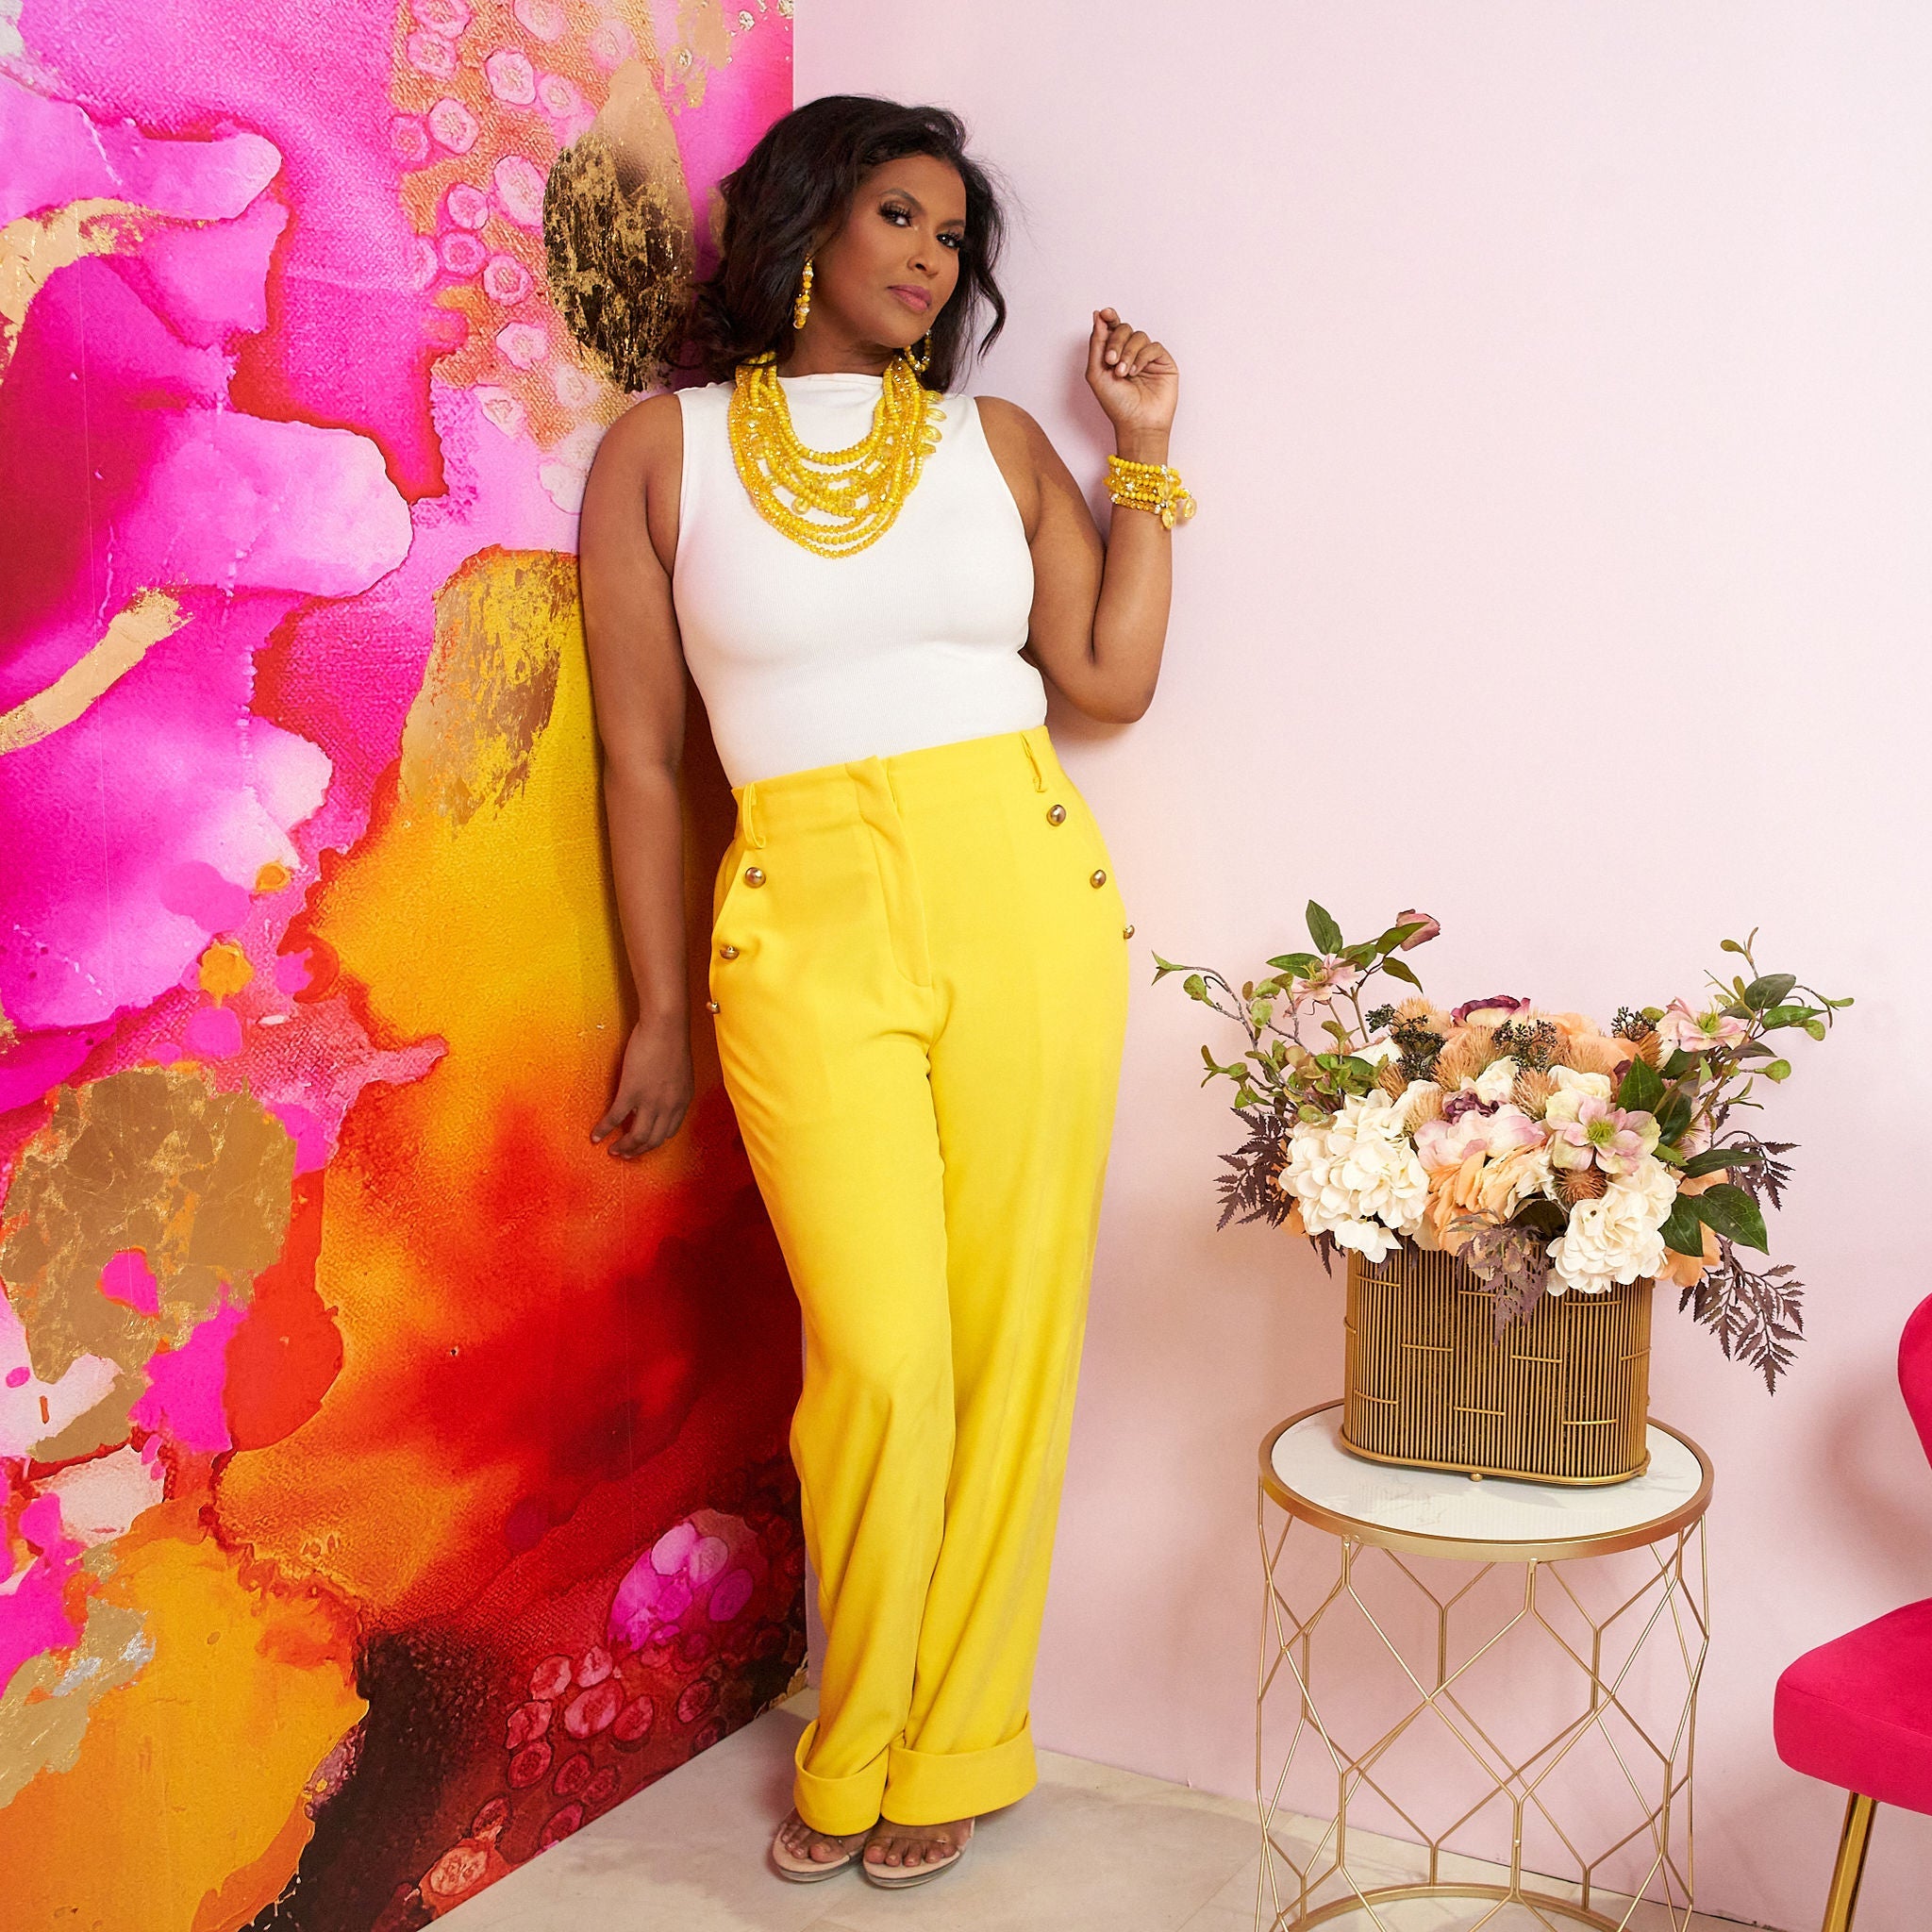 The Iman Trousers - Canary - Sassy Jones, high waist pants, cuff hem, yellow trousers, relaxed fit